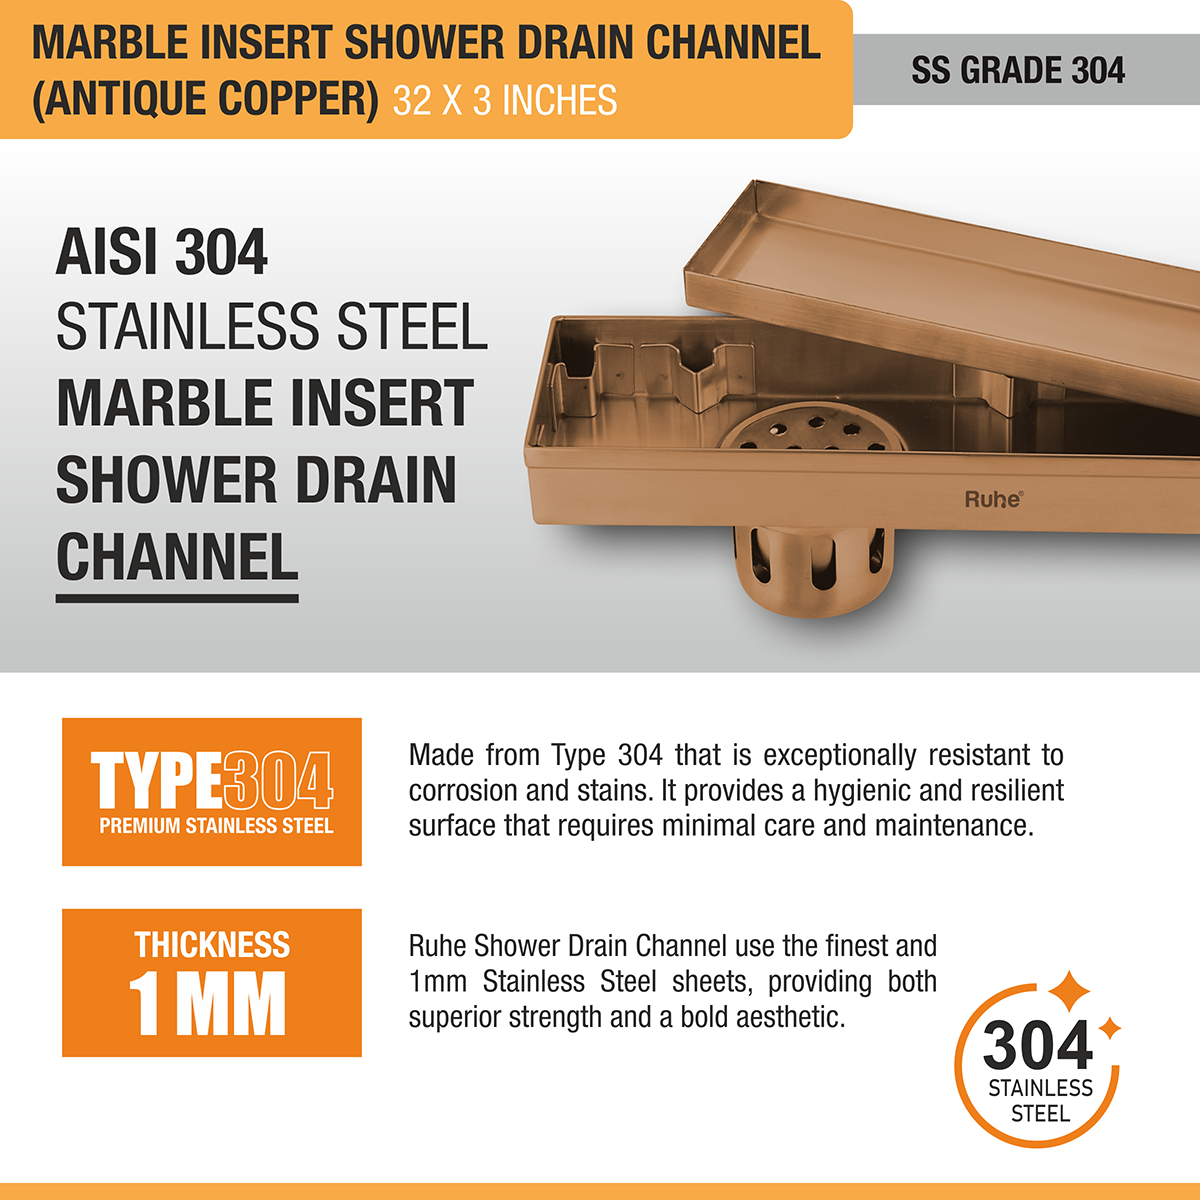 Marble Insert Shower Drain Channel (32 x 3 Inches) ROSE GOLD PVD Coated stainless steel